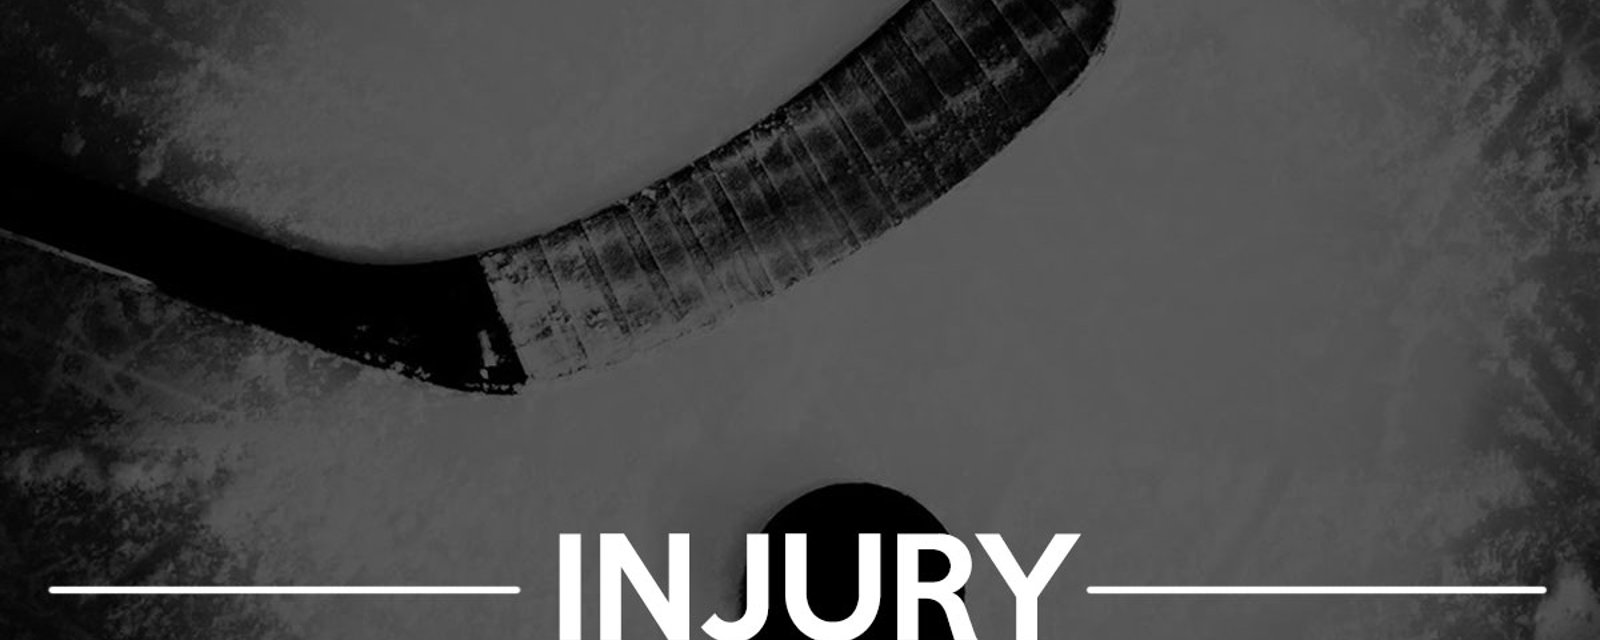 Talented forward placed on the IR with concussion backlash.